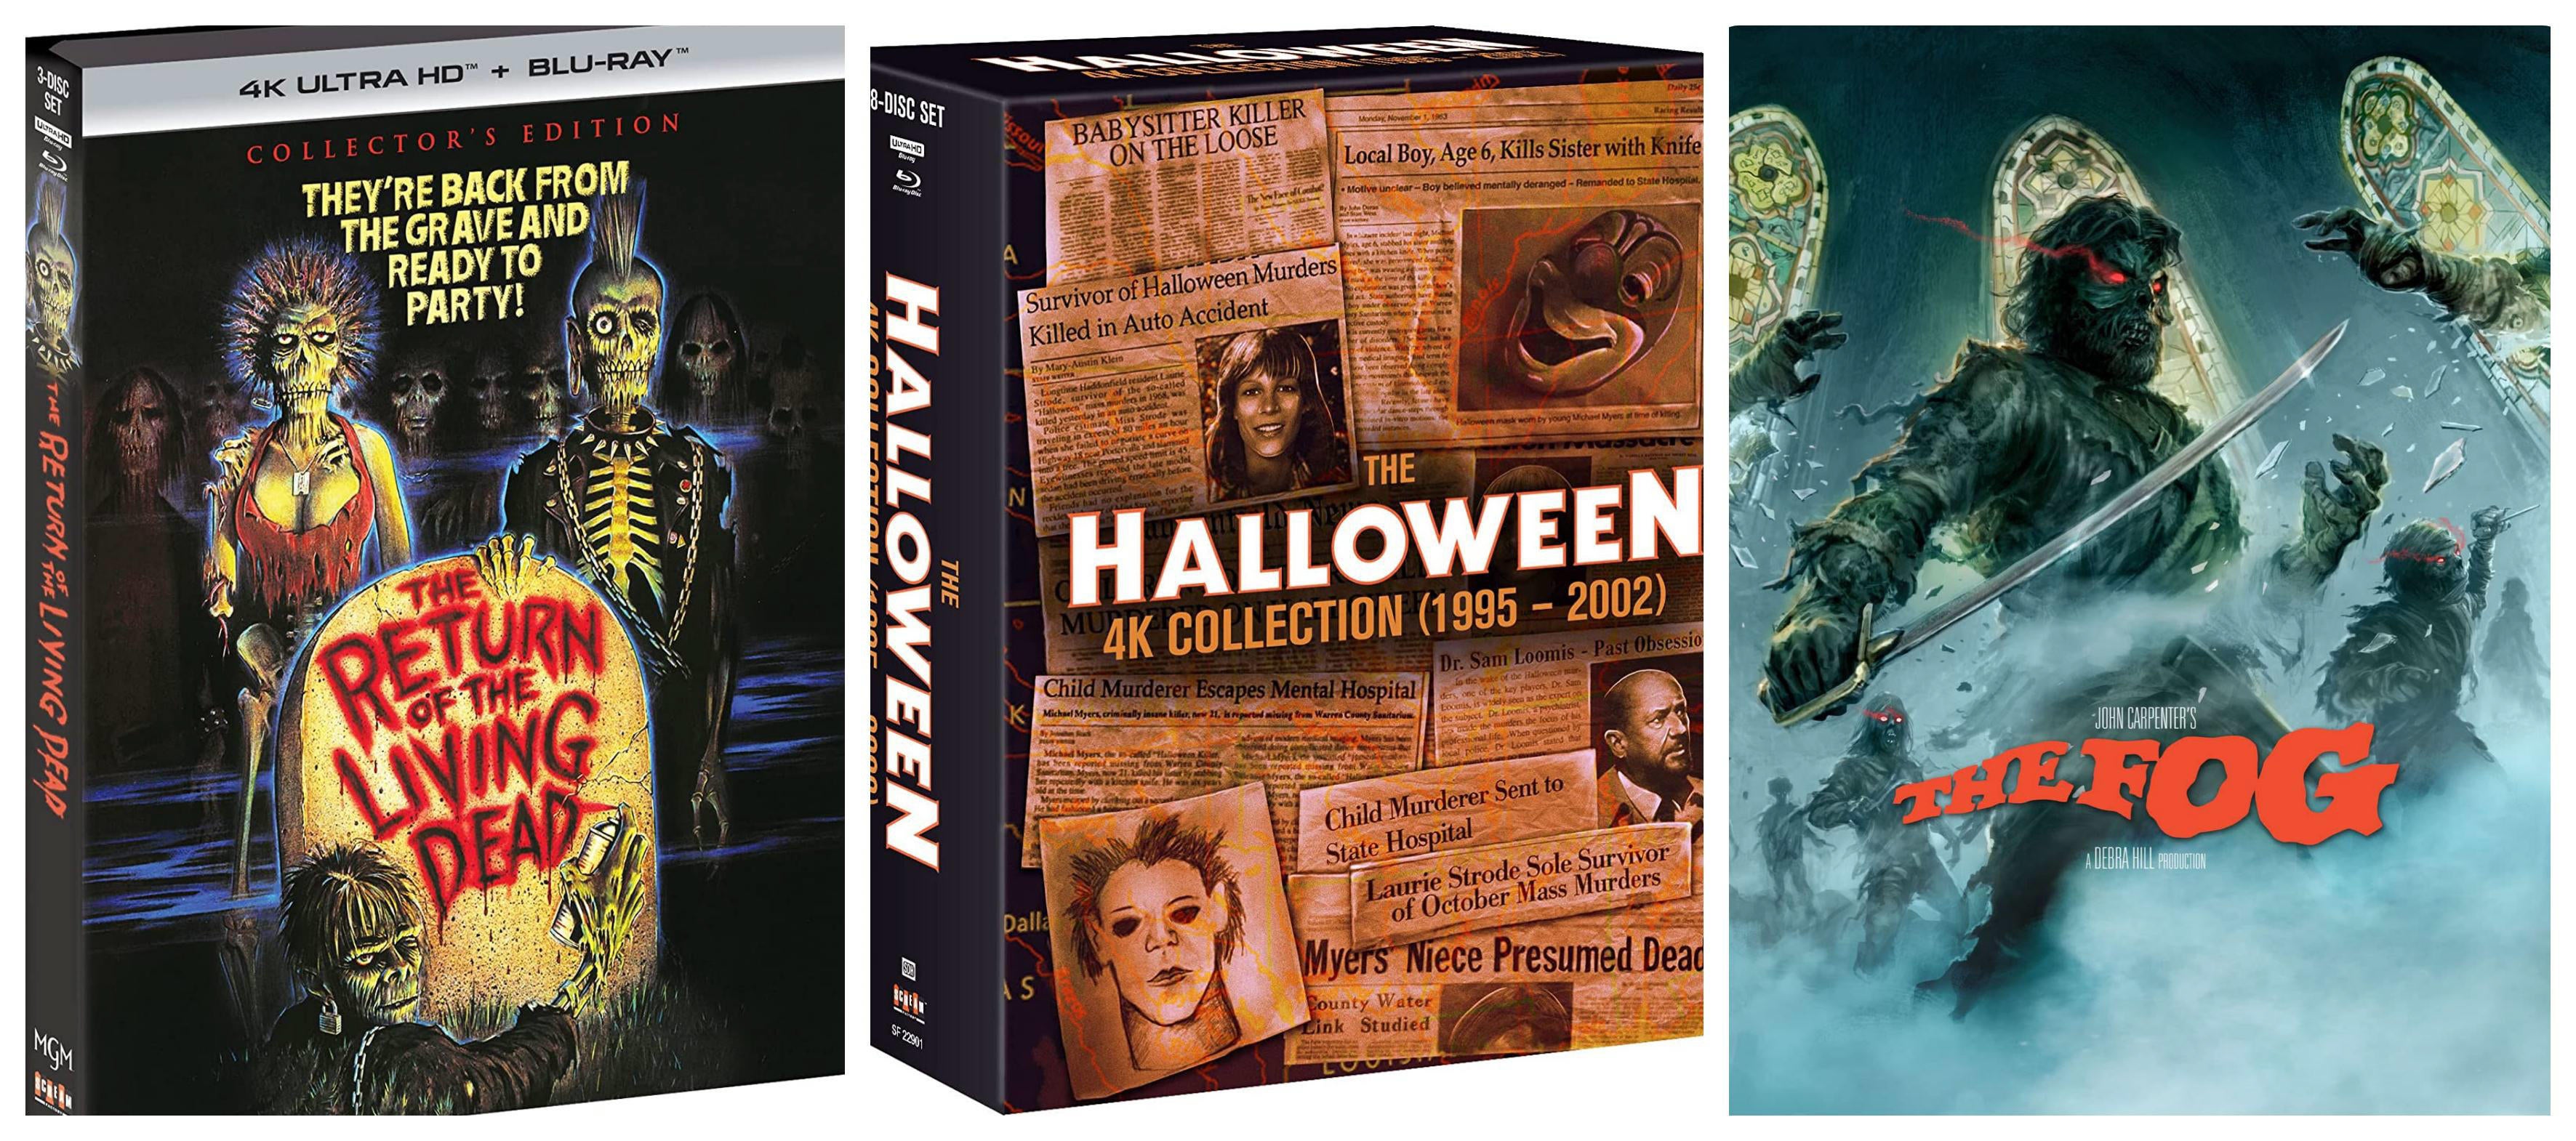 New Horror 4K Blu-ray Pre-Orders: Halloween Collection, The Return 